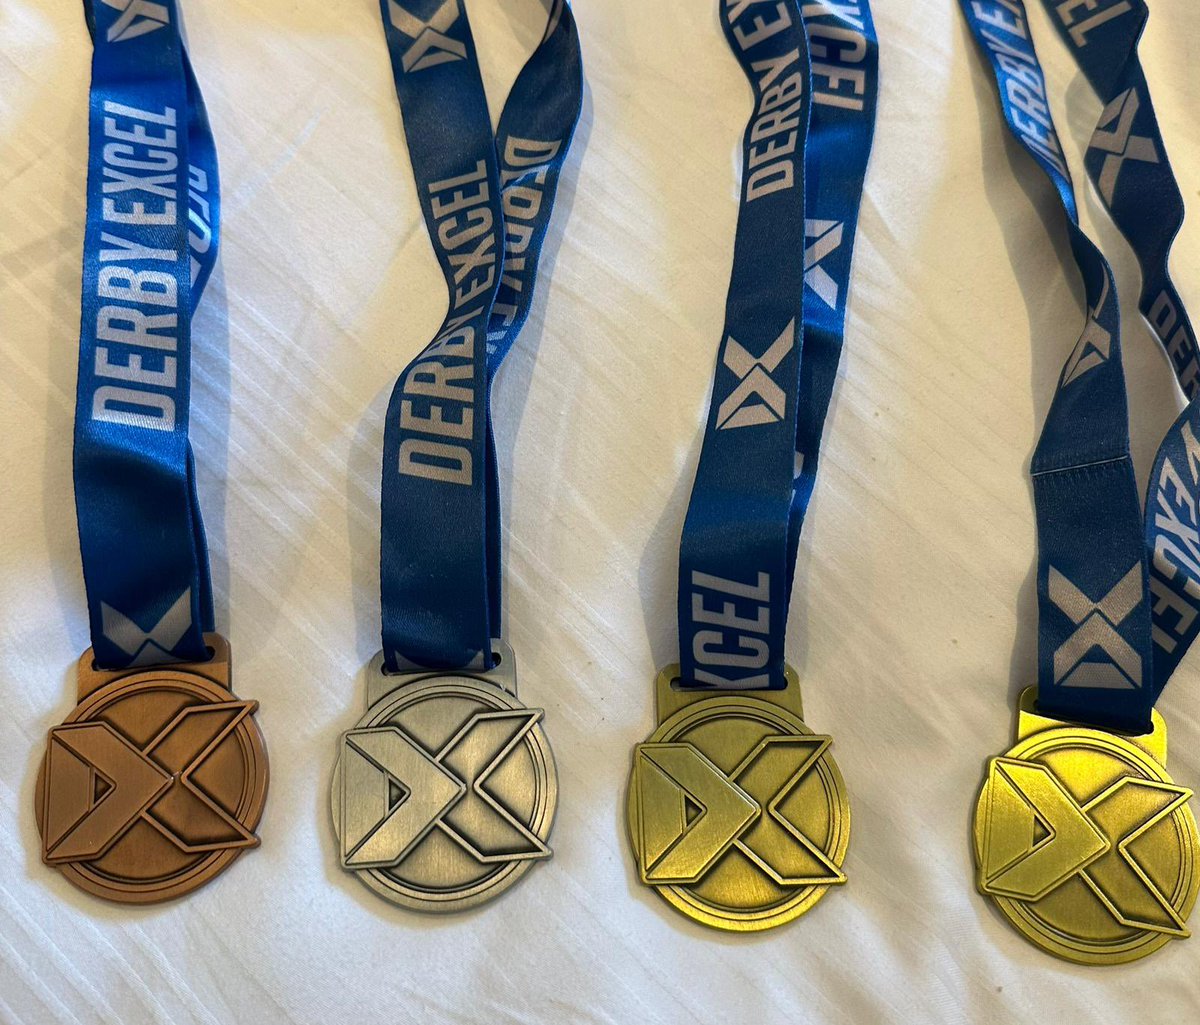 Well done to everyone who raced at the @derbyexcelsc meet in Sheffield. Some great racing, PBS and plenty of medals. Well done also to Daniel Khodaverdi who finished top boy in his age group. A massive thank you to our coaches,officials and TMs across the weekend @lifeleisureuk